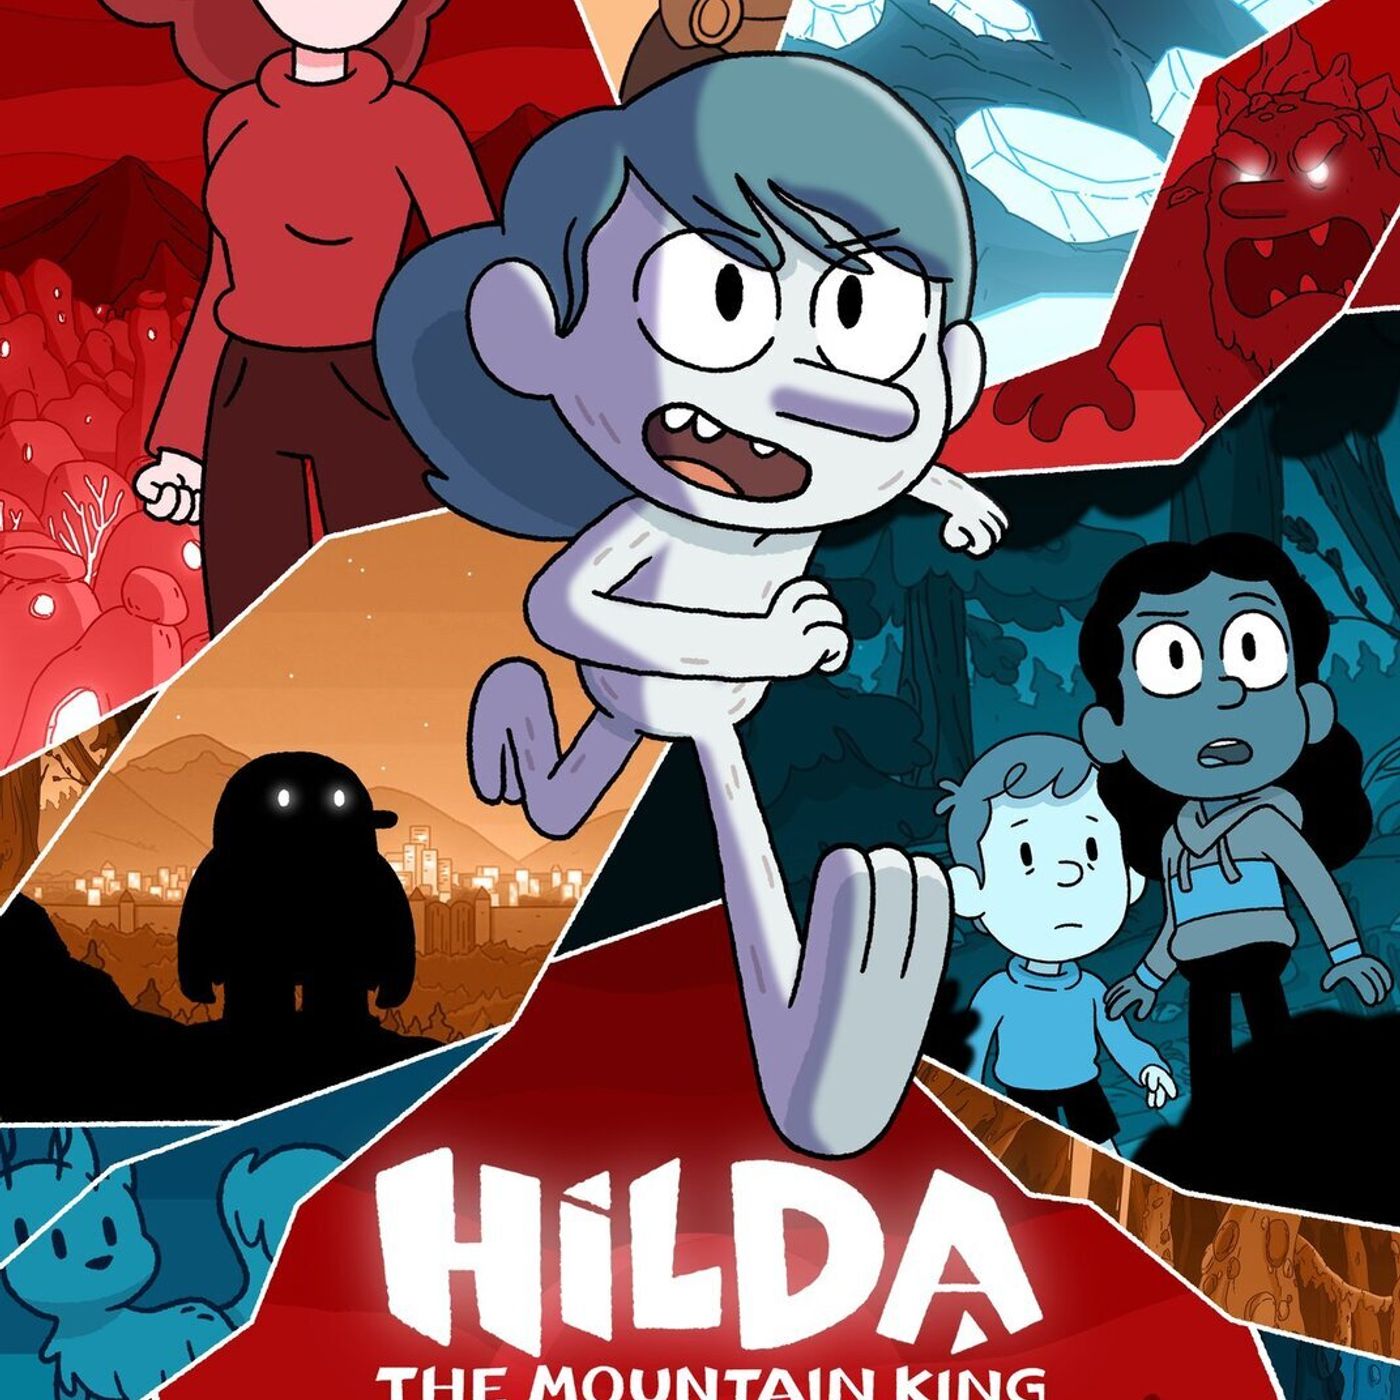 Hilda and the Mountain King deep dive - Dreaming Machine 15